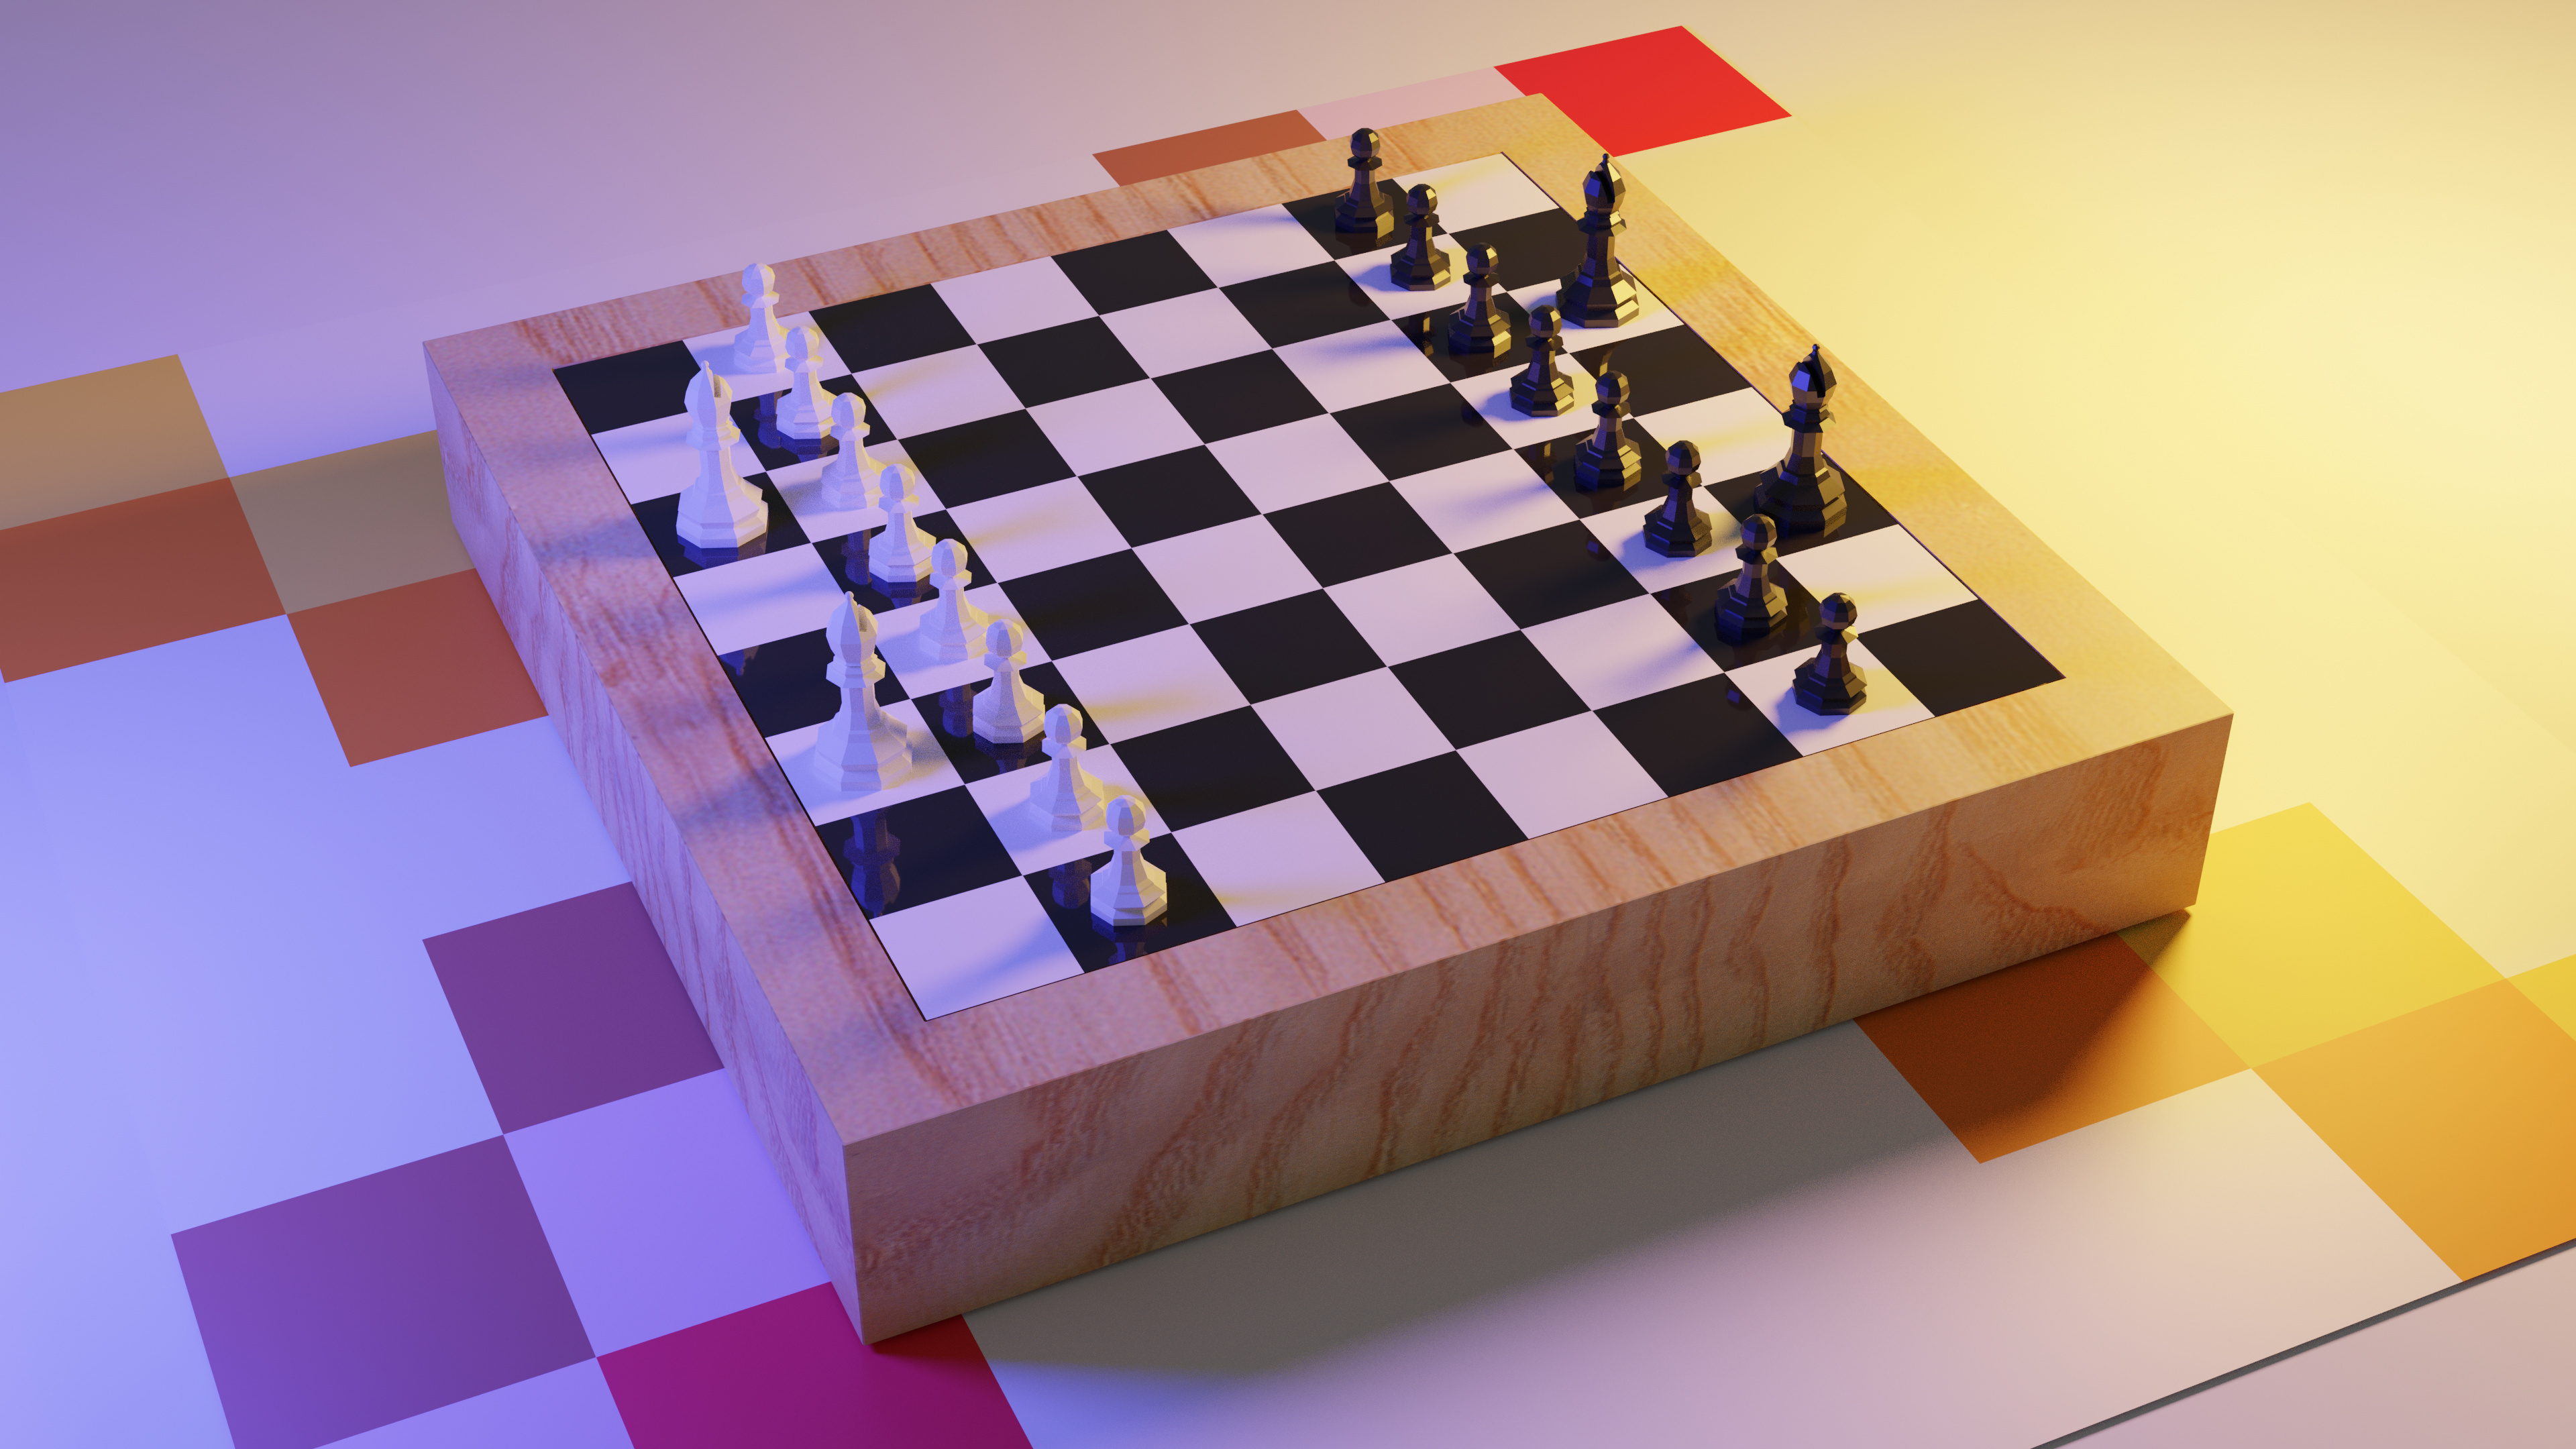 Chess%20Invaders%20(with%20black%20reflection%20and%20wood)